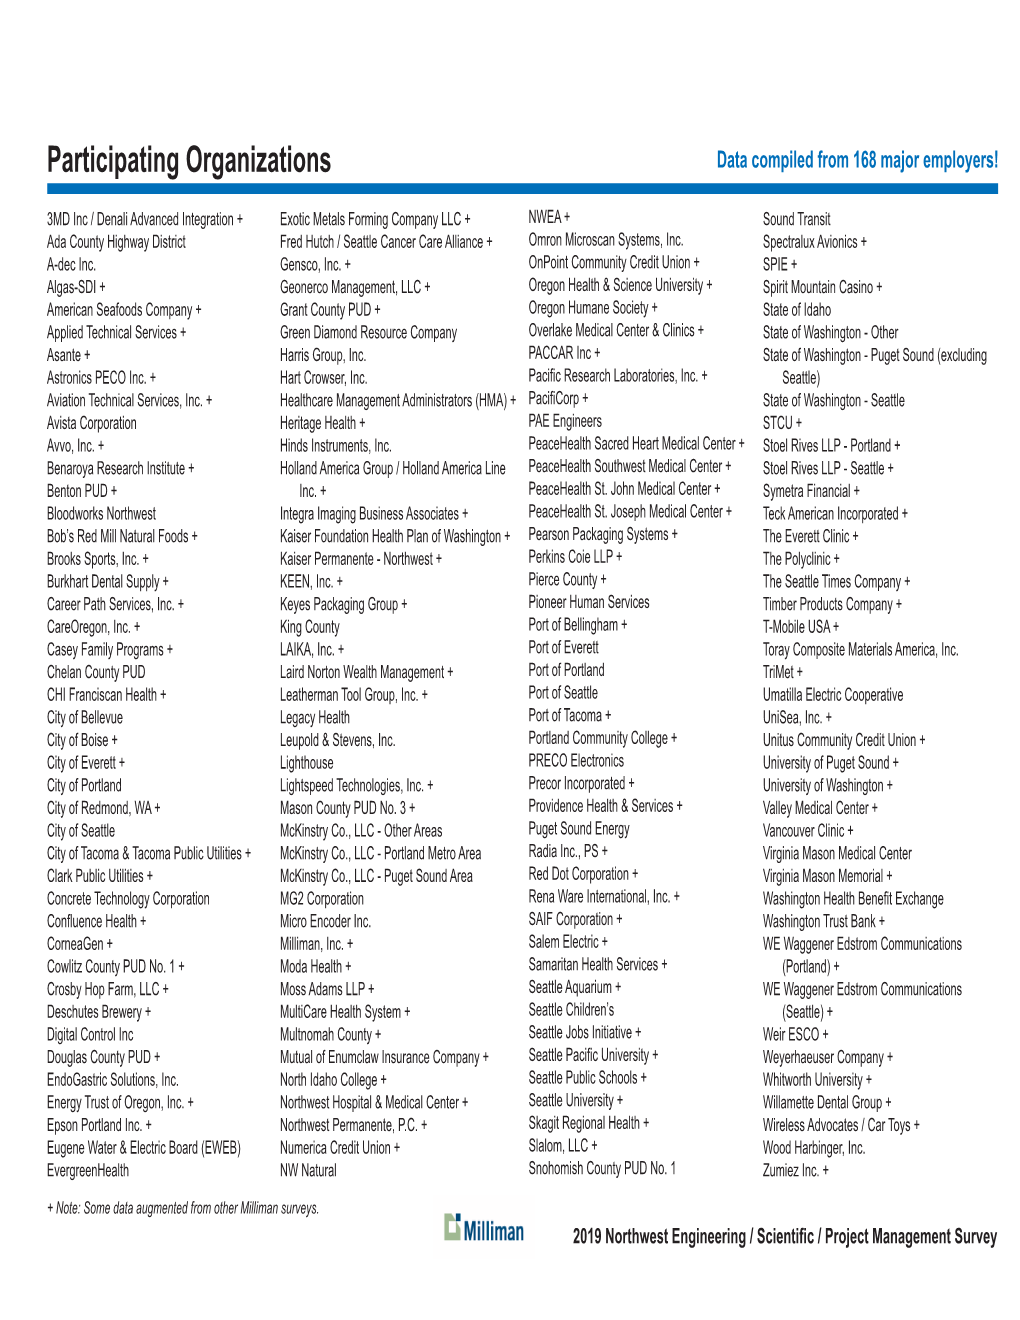 Participating Organizations Data Compiled from 168 Major Employers!